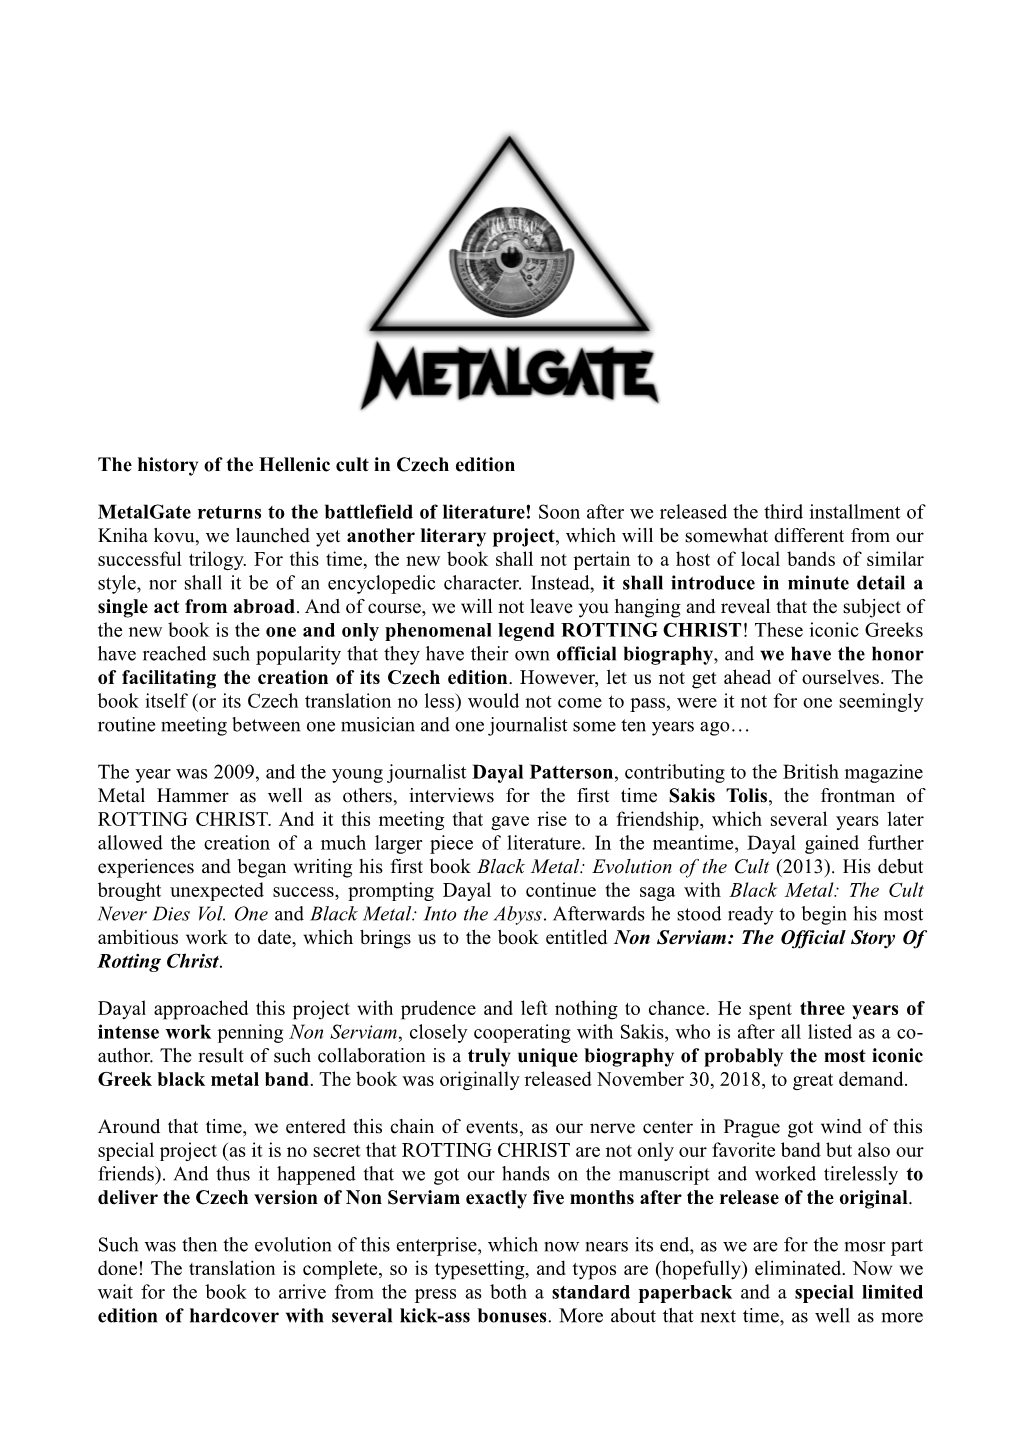 The History of the Hellenic Cult in Czech Edition Metalgate Returns To